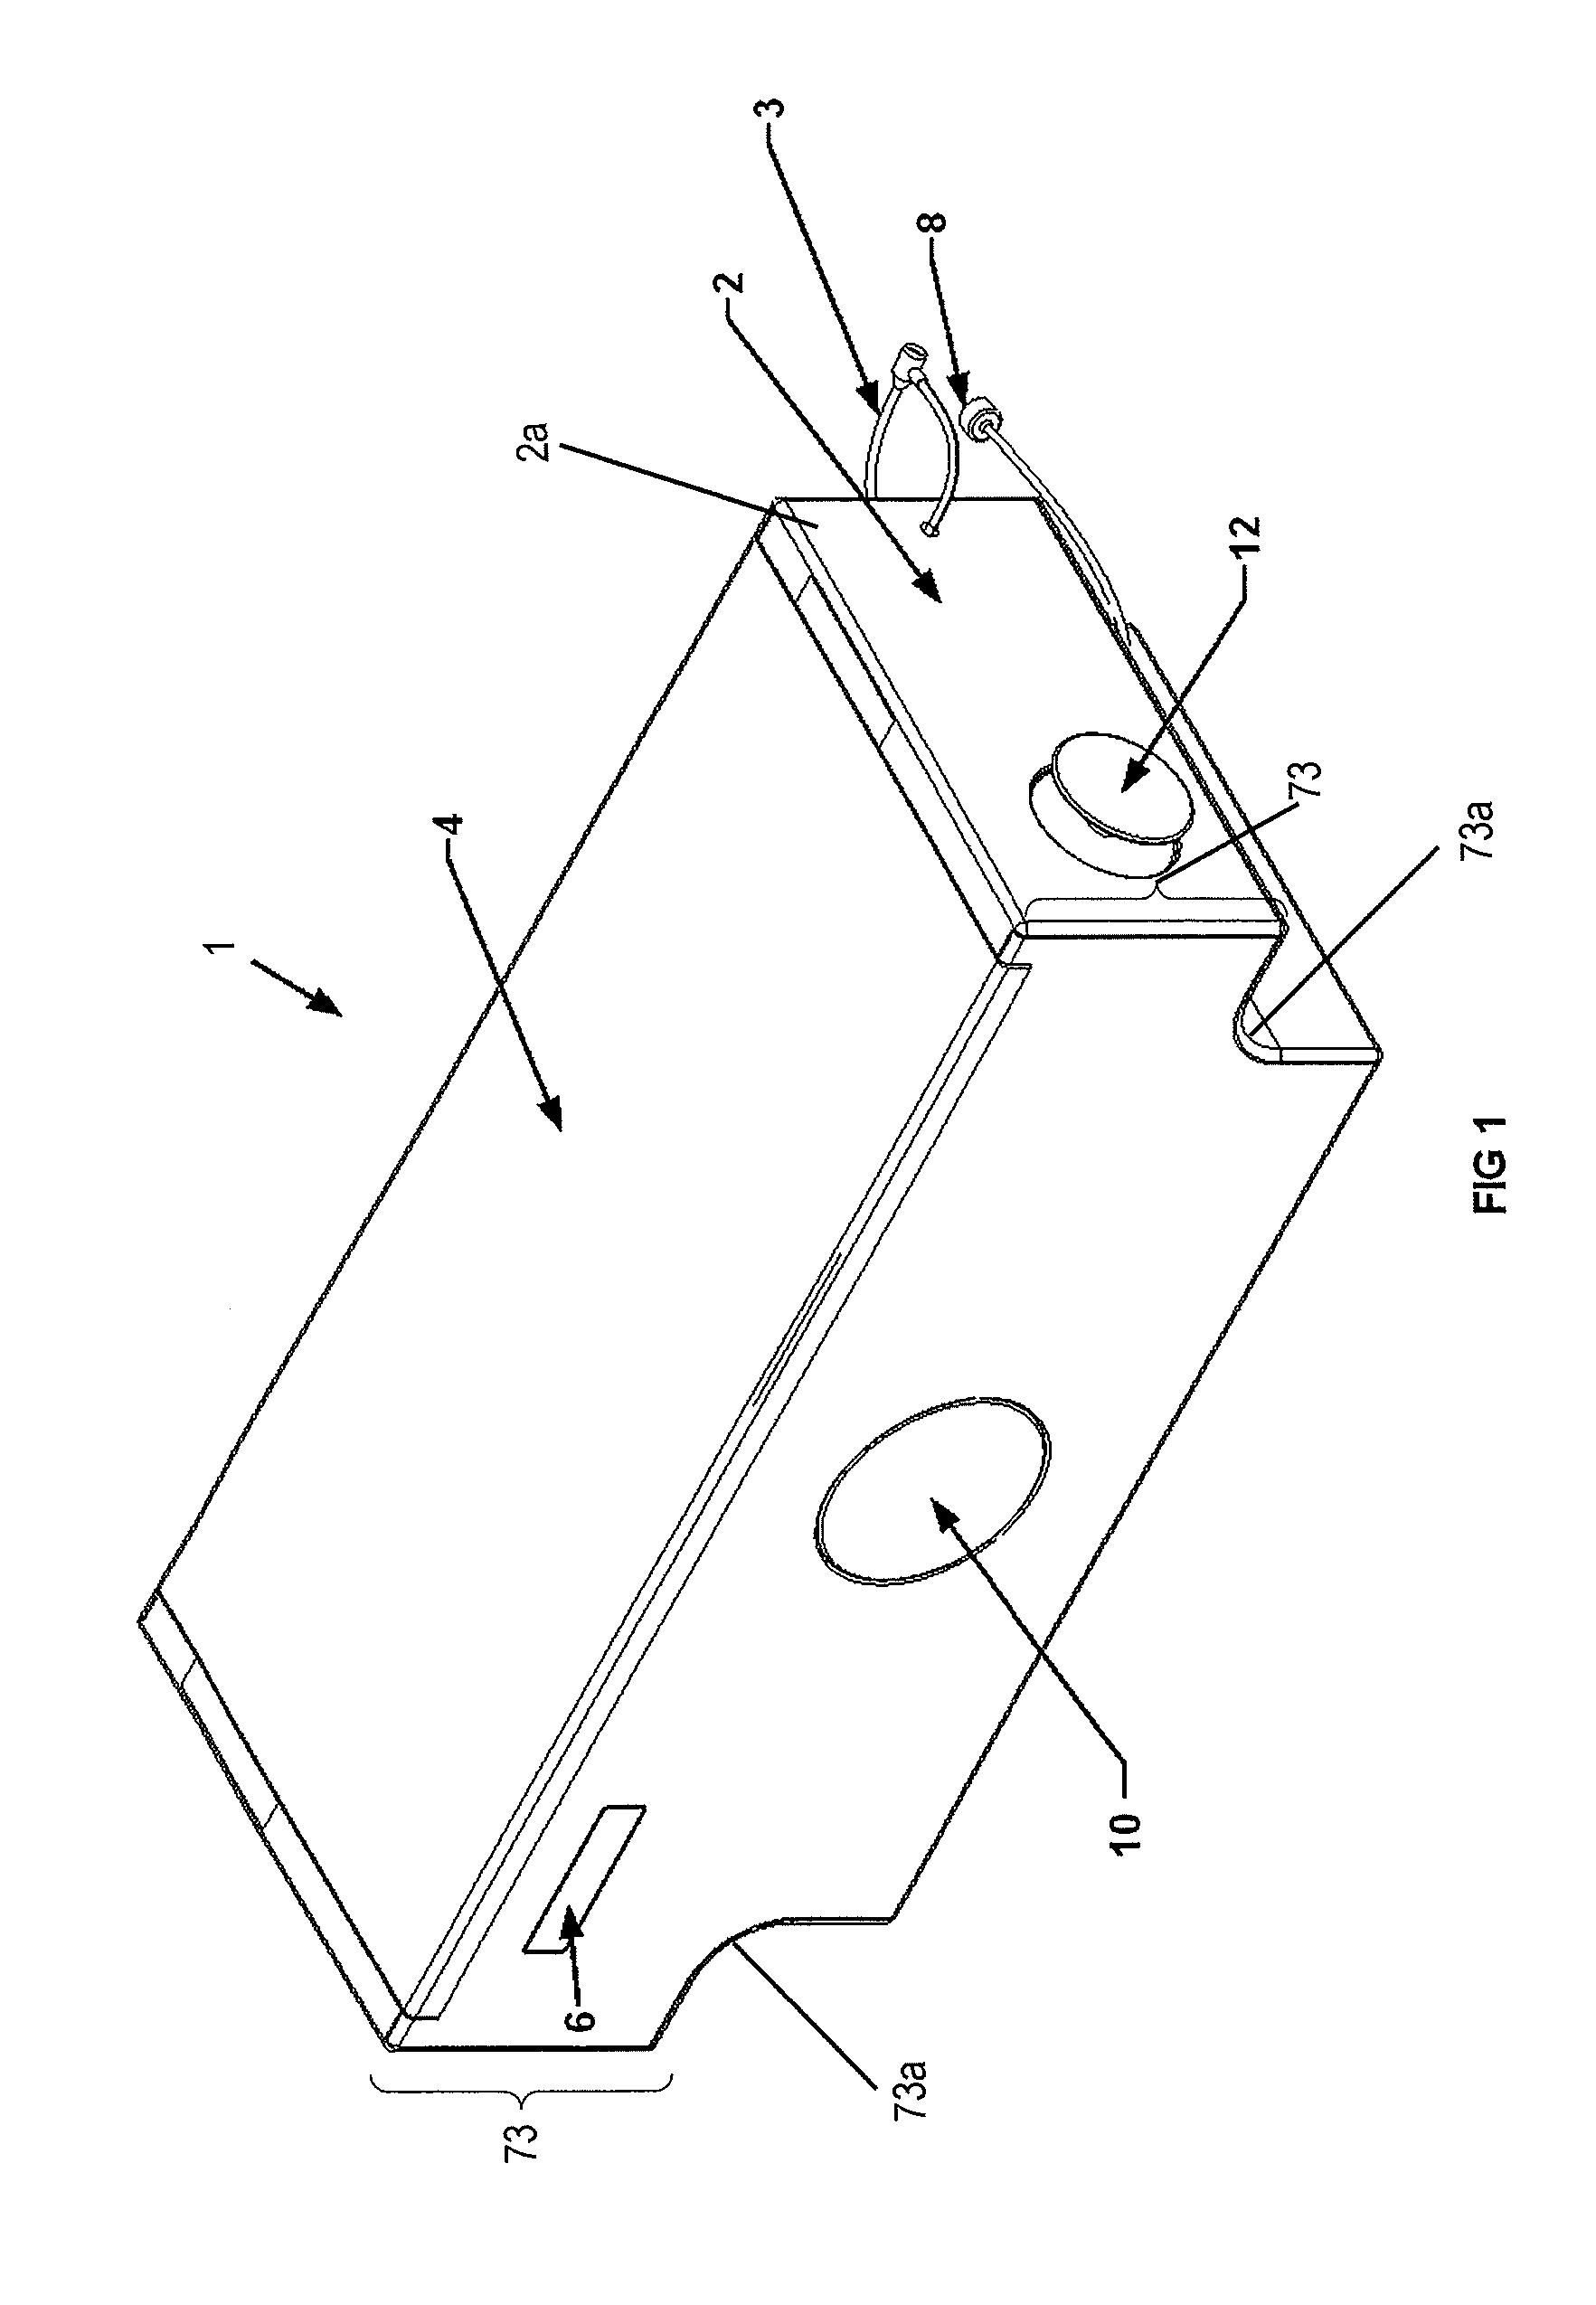 System, enclosure and method for deployment of audio visual equipment from a vehicle as a base